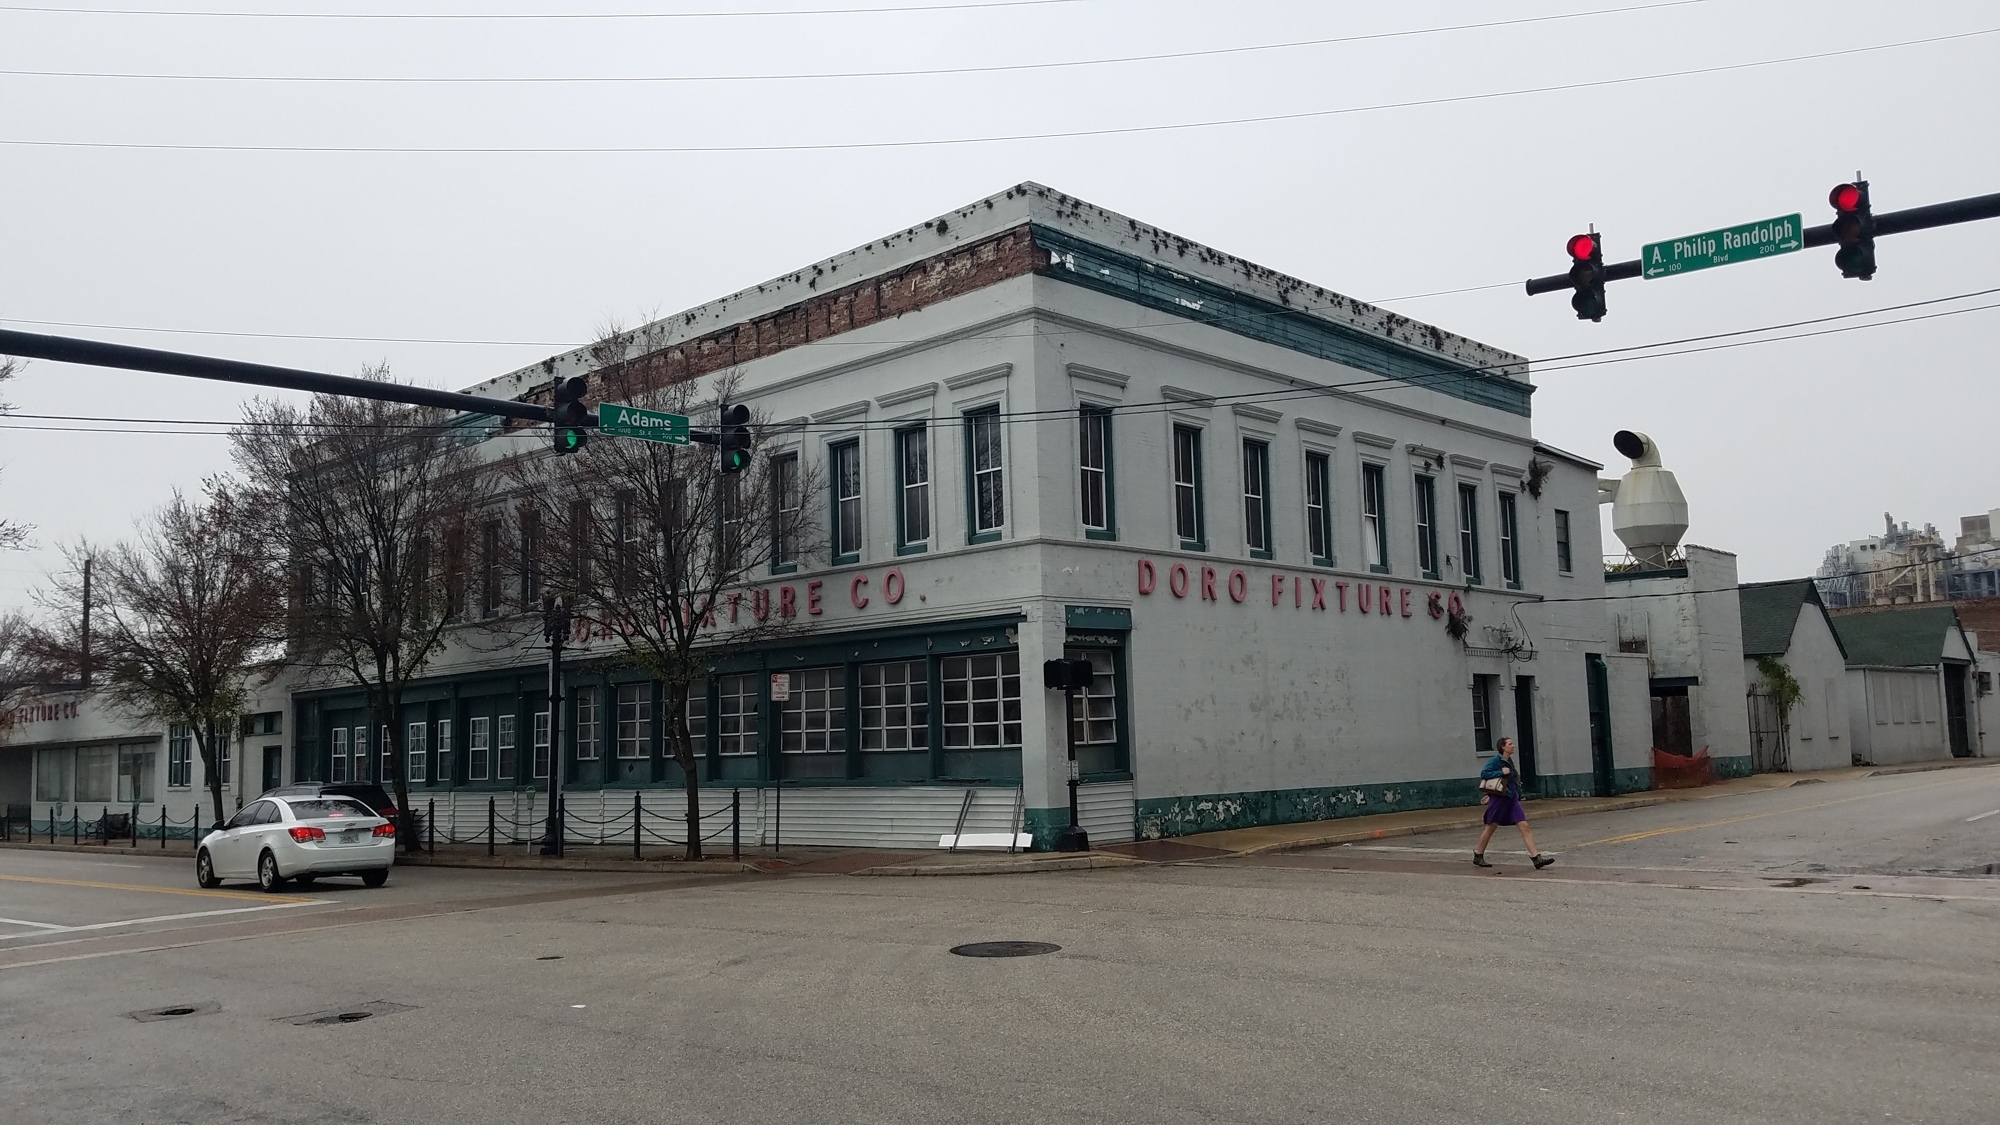 The George Doro Fixture Co. building does not have local landmark status to protect it from demolition, according to a Downtown Investment Authority staff report.